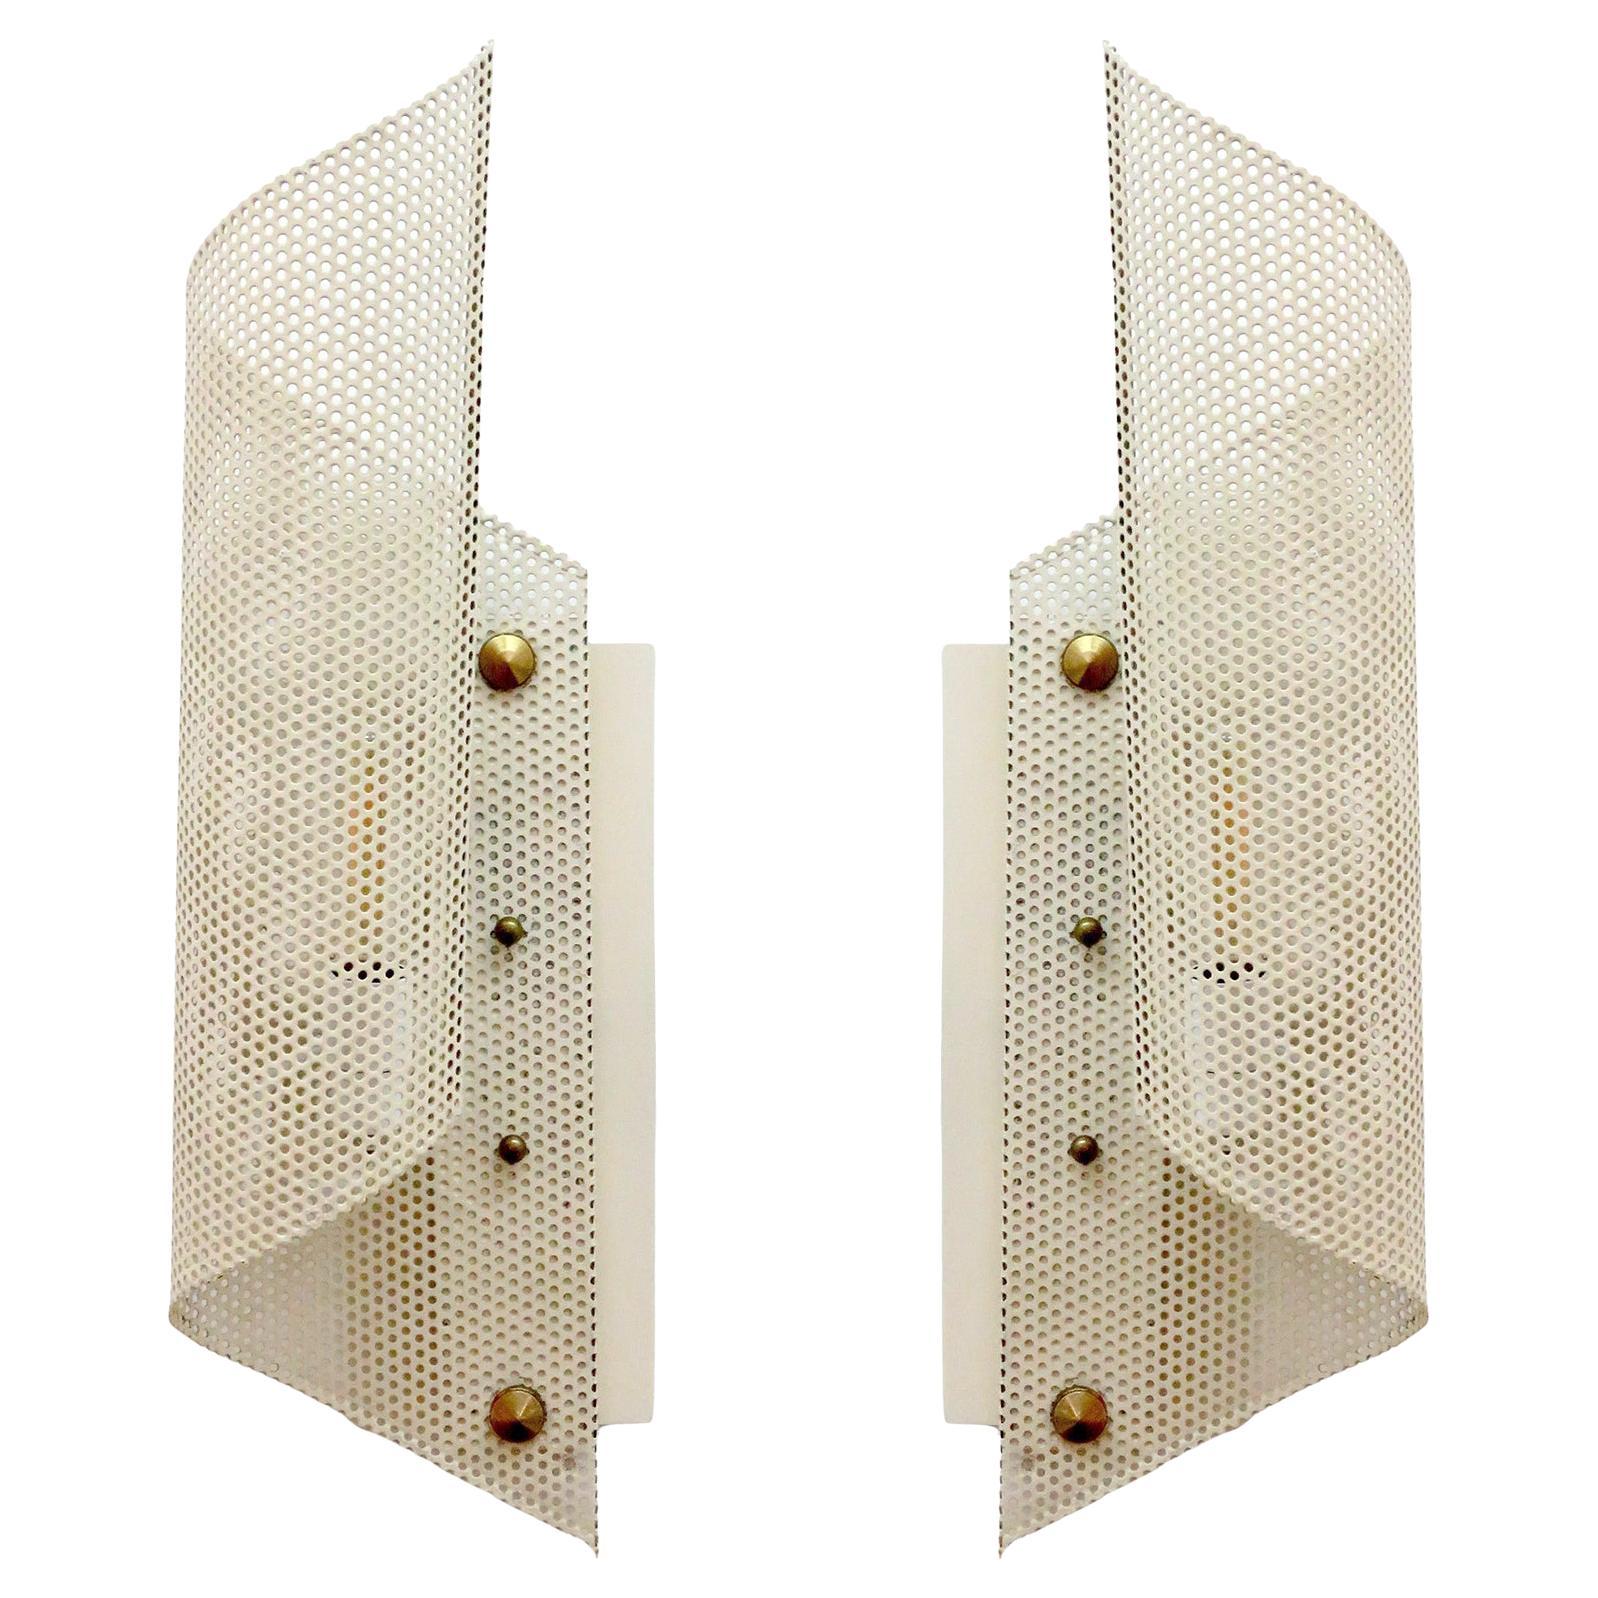 Pair of French Perforated Wall Lights by Lunel, 1950